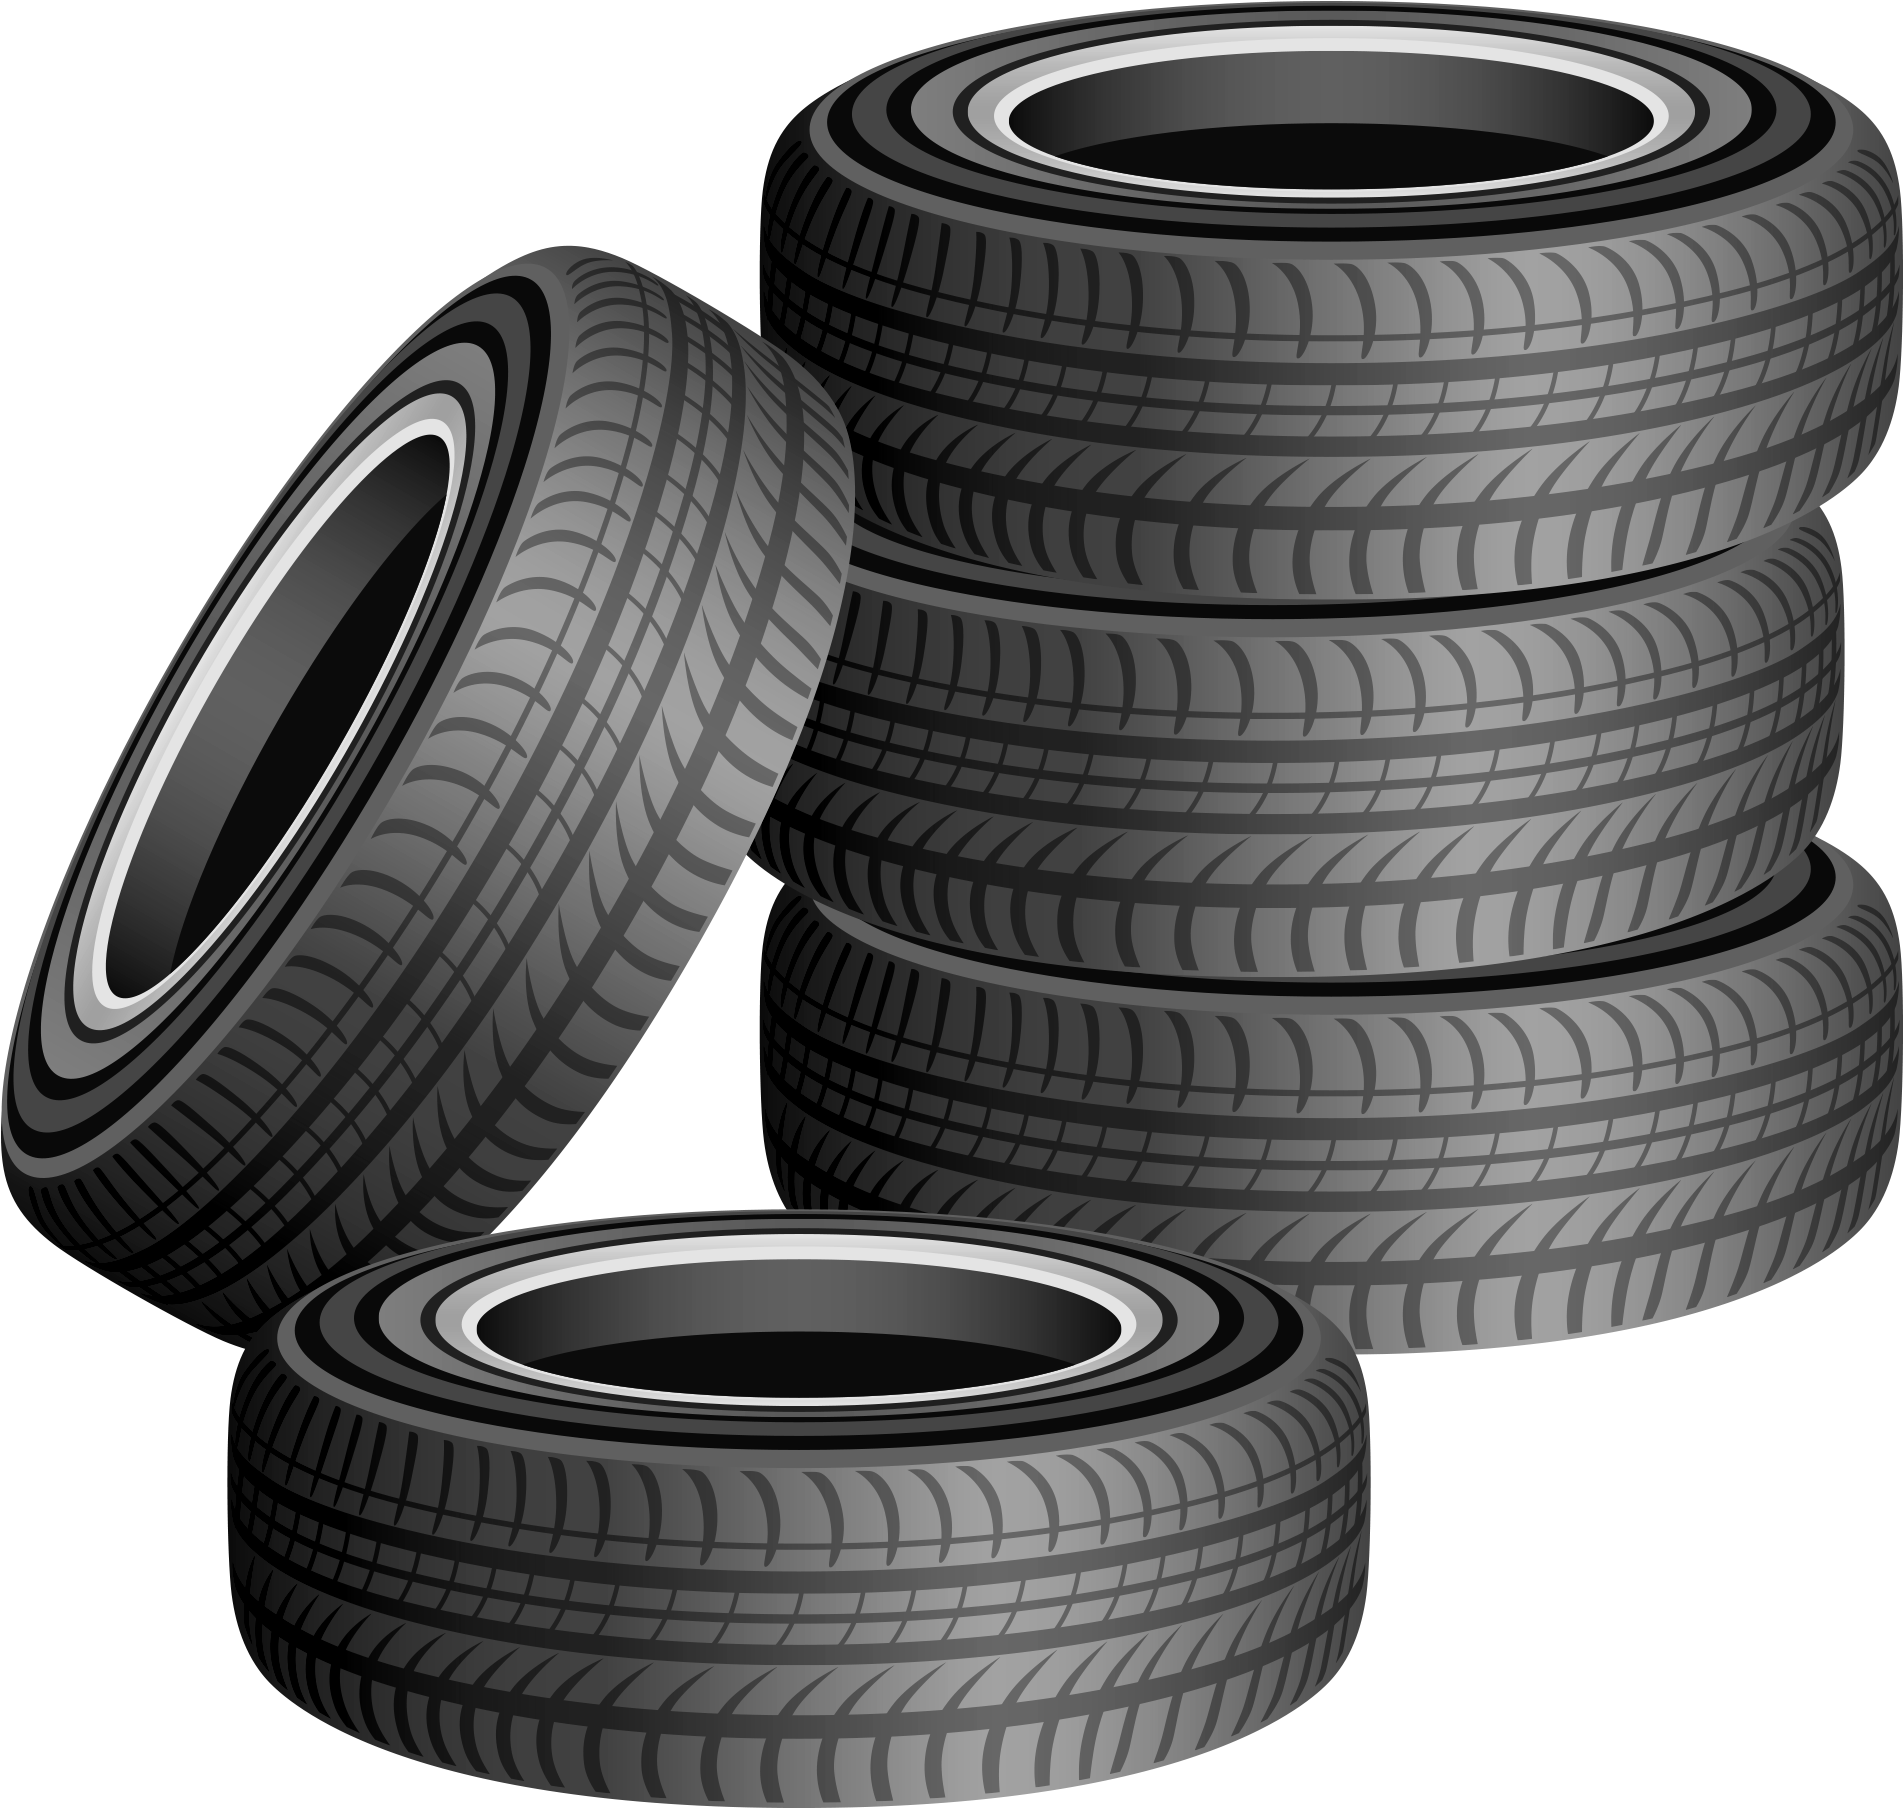 [100+] Tyres Png Images | Wallpapers.com